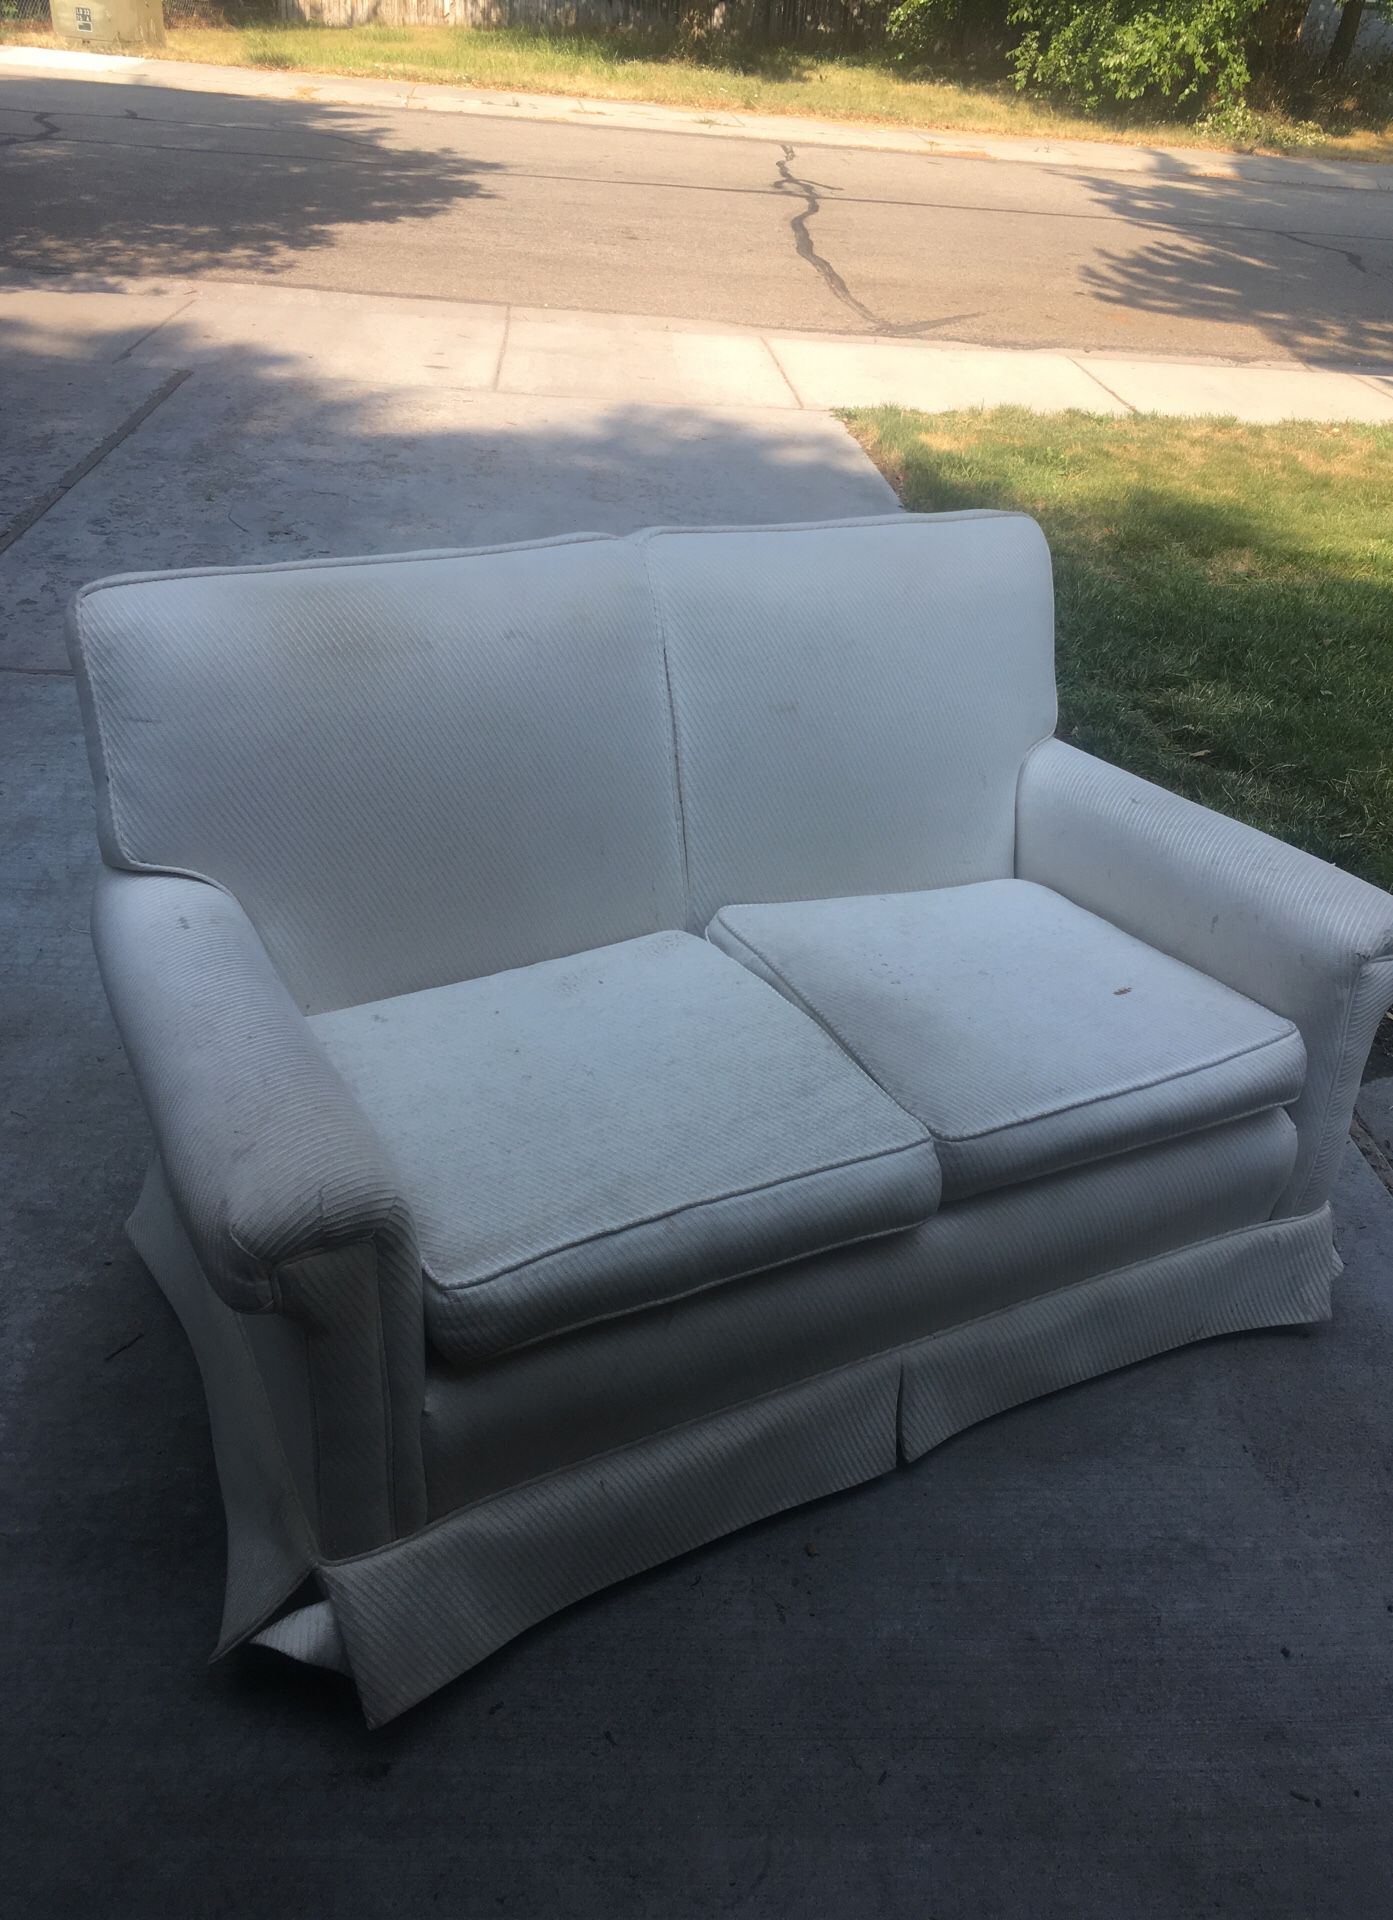 Loveseat / small couch